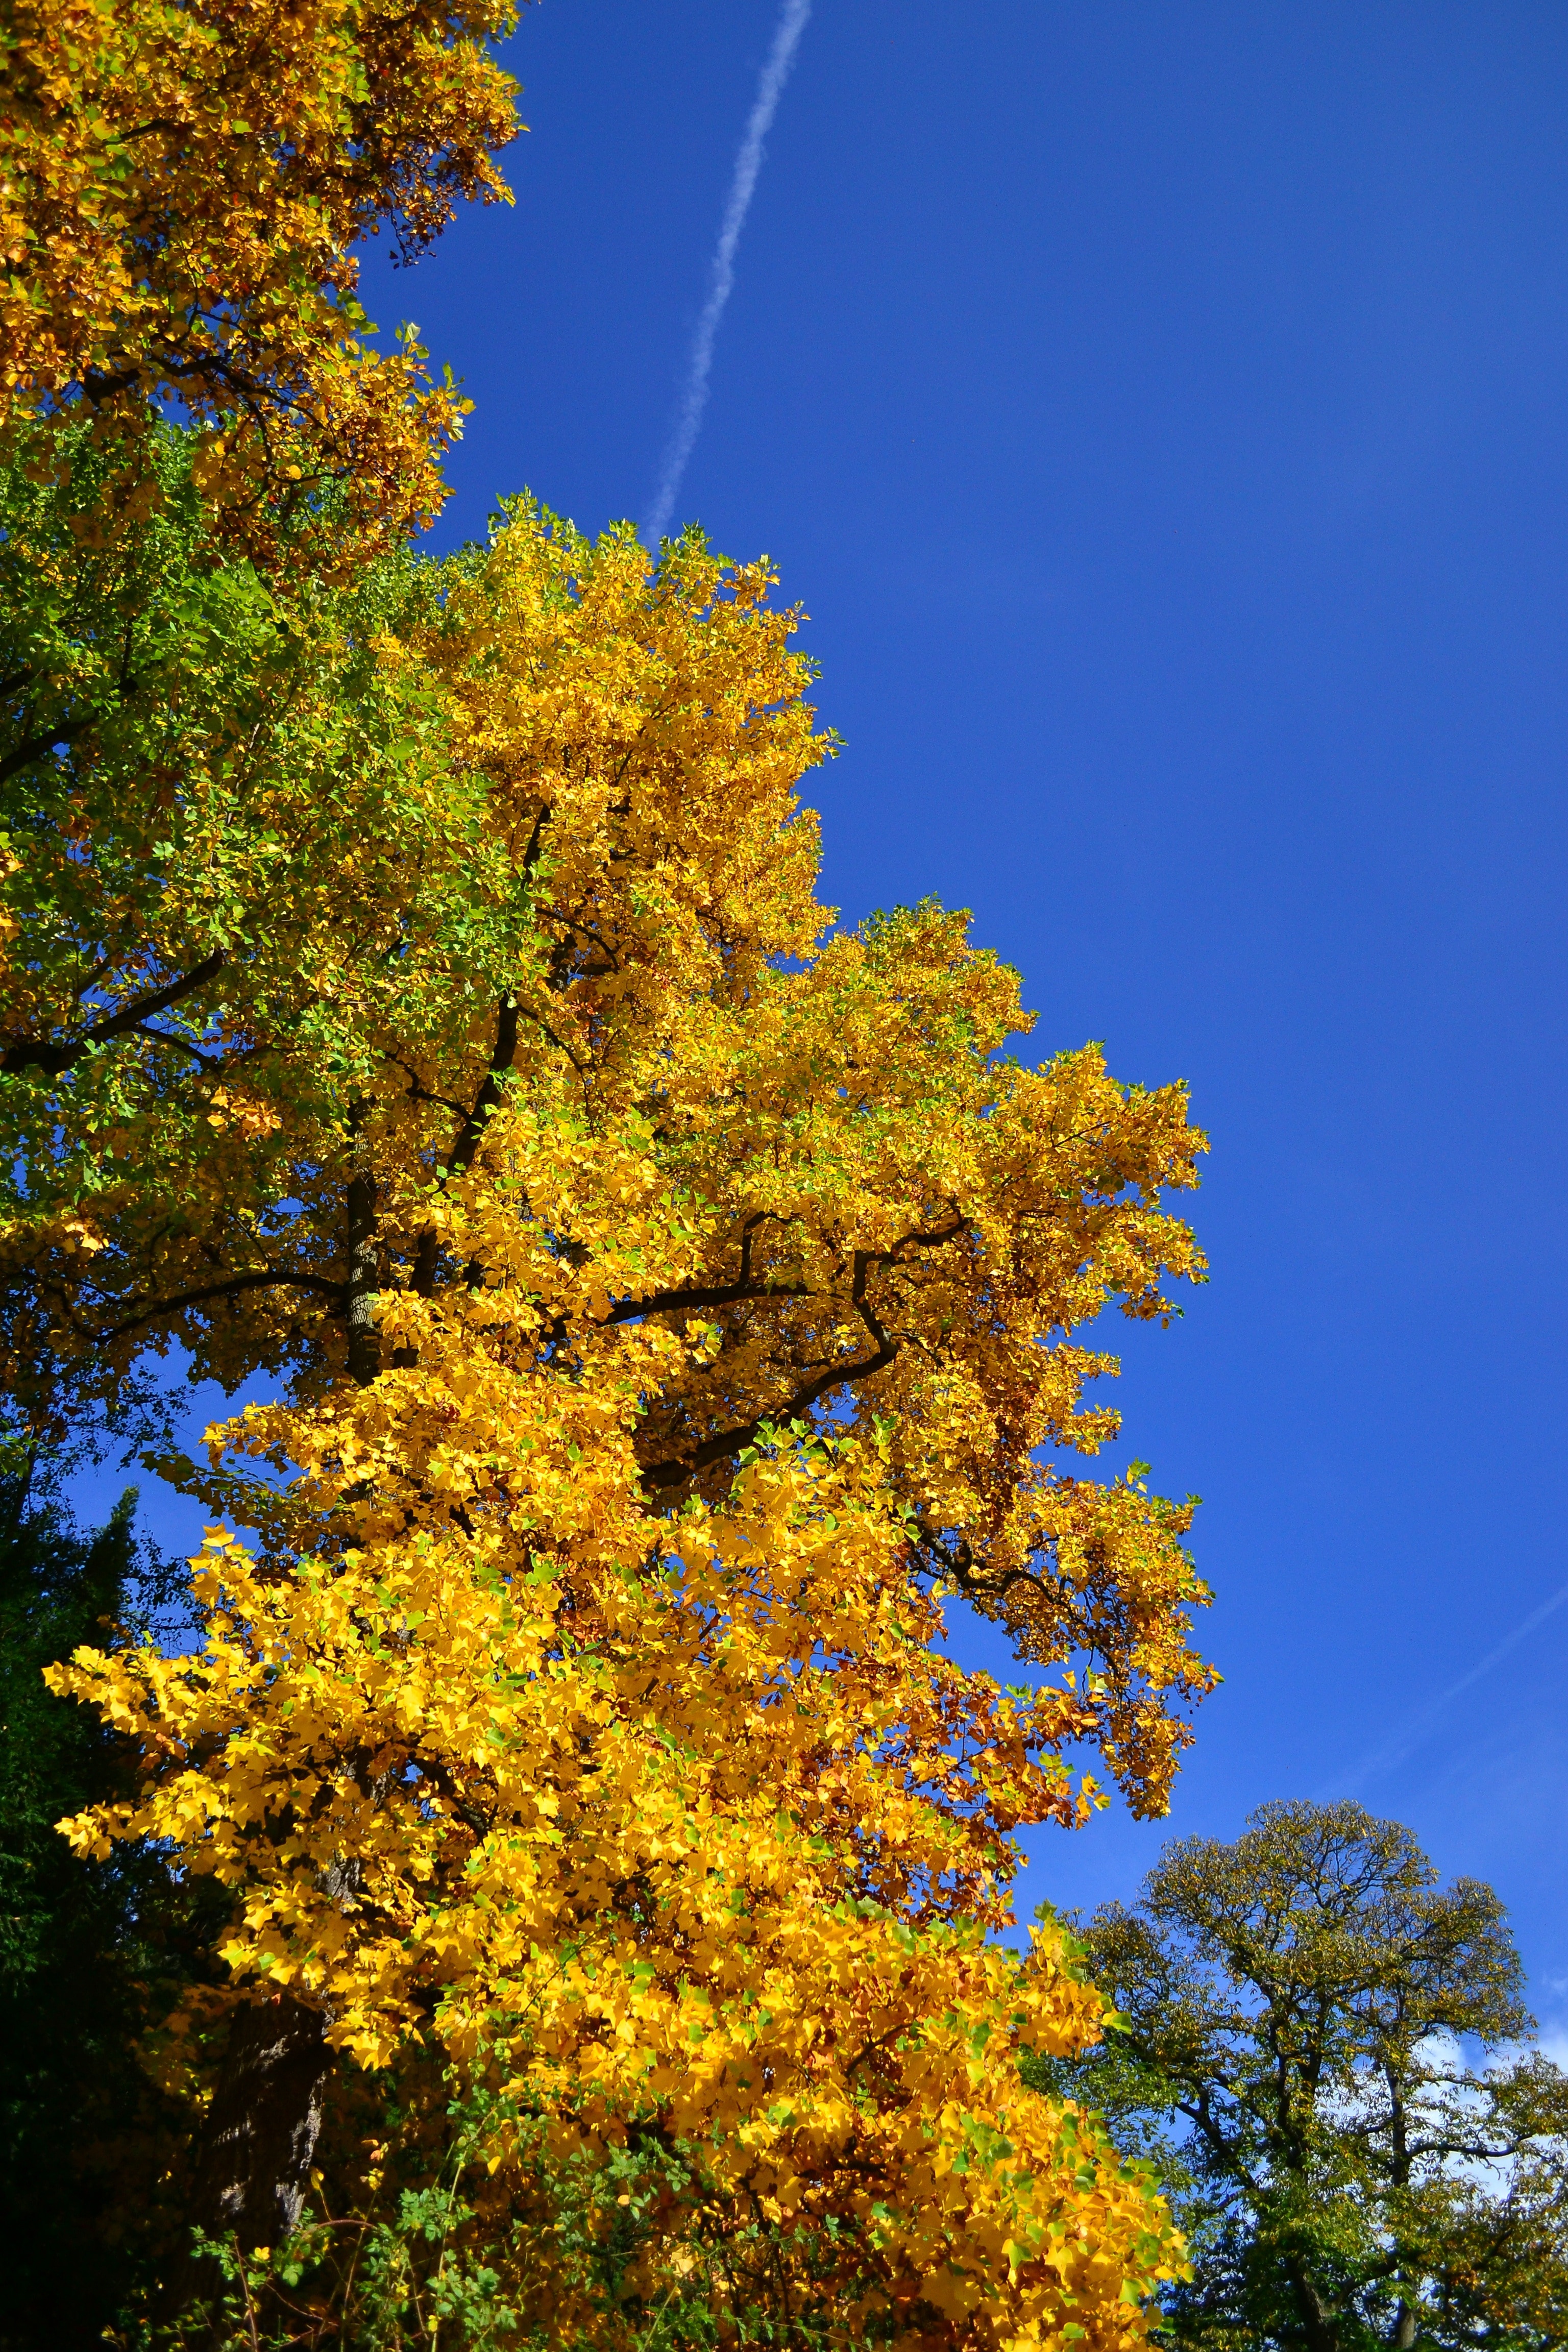 photography of yellow flowered tree under clear blue sky with white thin smoke